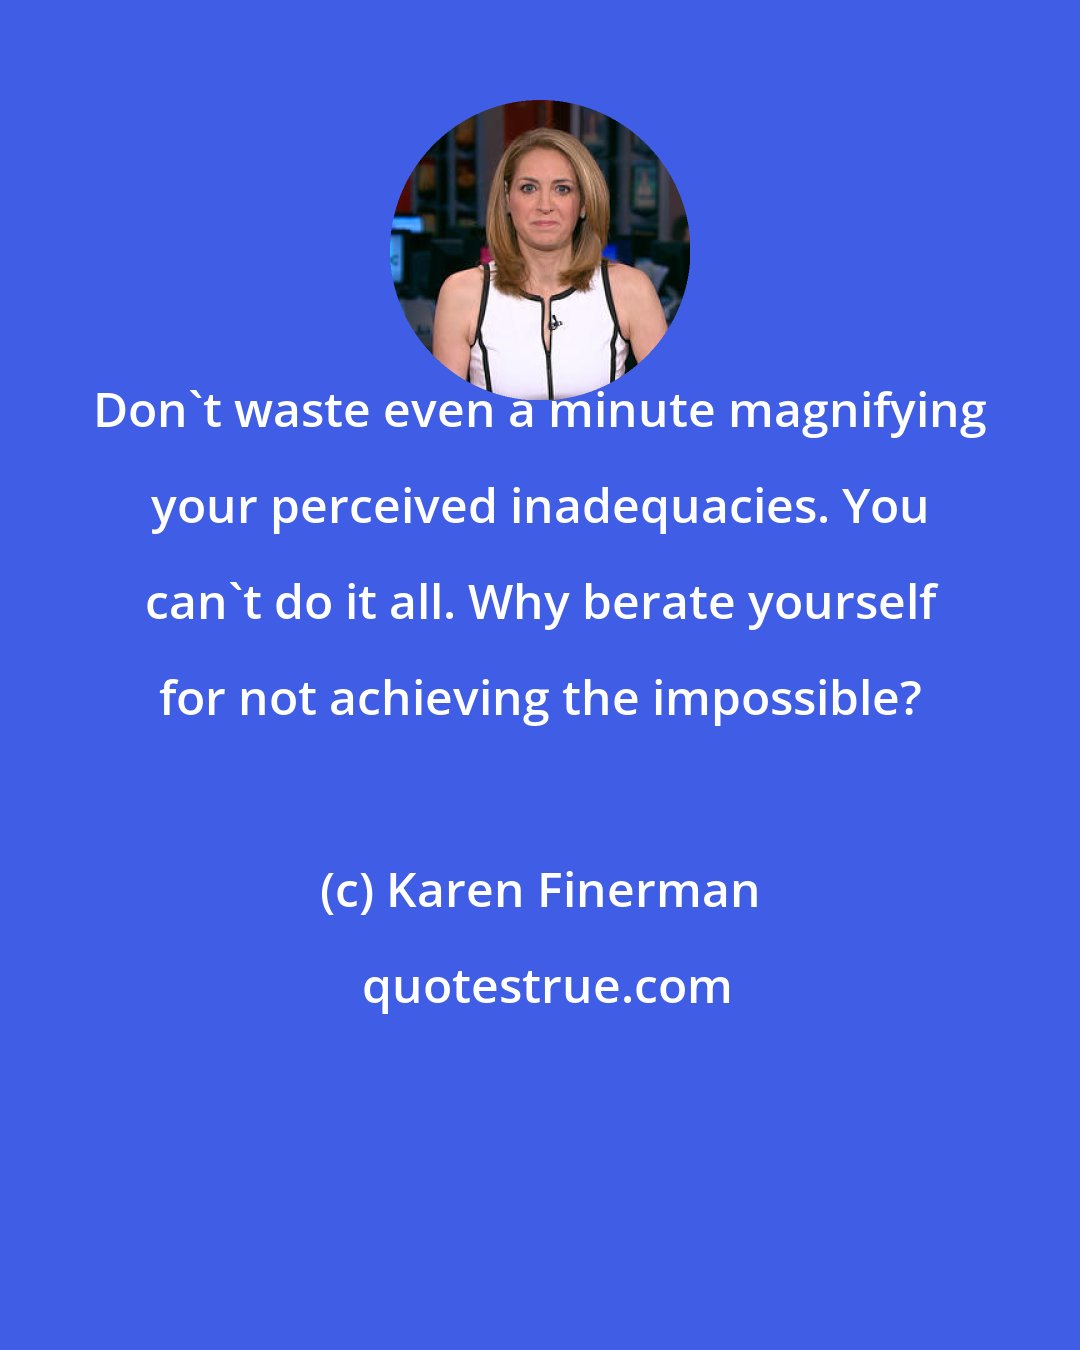 Karen Finerman: Don't waste even a minute magnifying your perceived inadequacies. You can't do it all. Why berate yourself for not achieving the impossible?